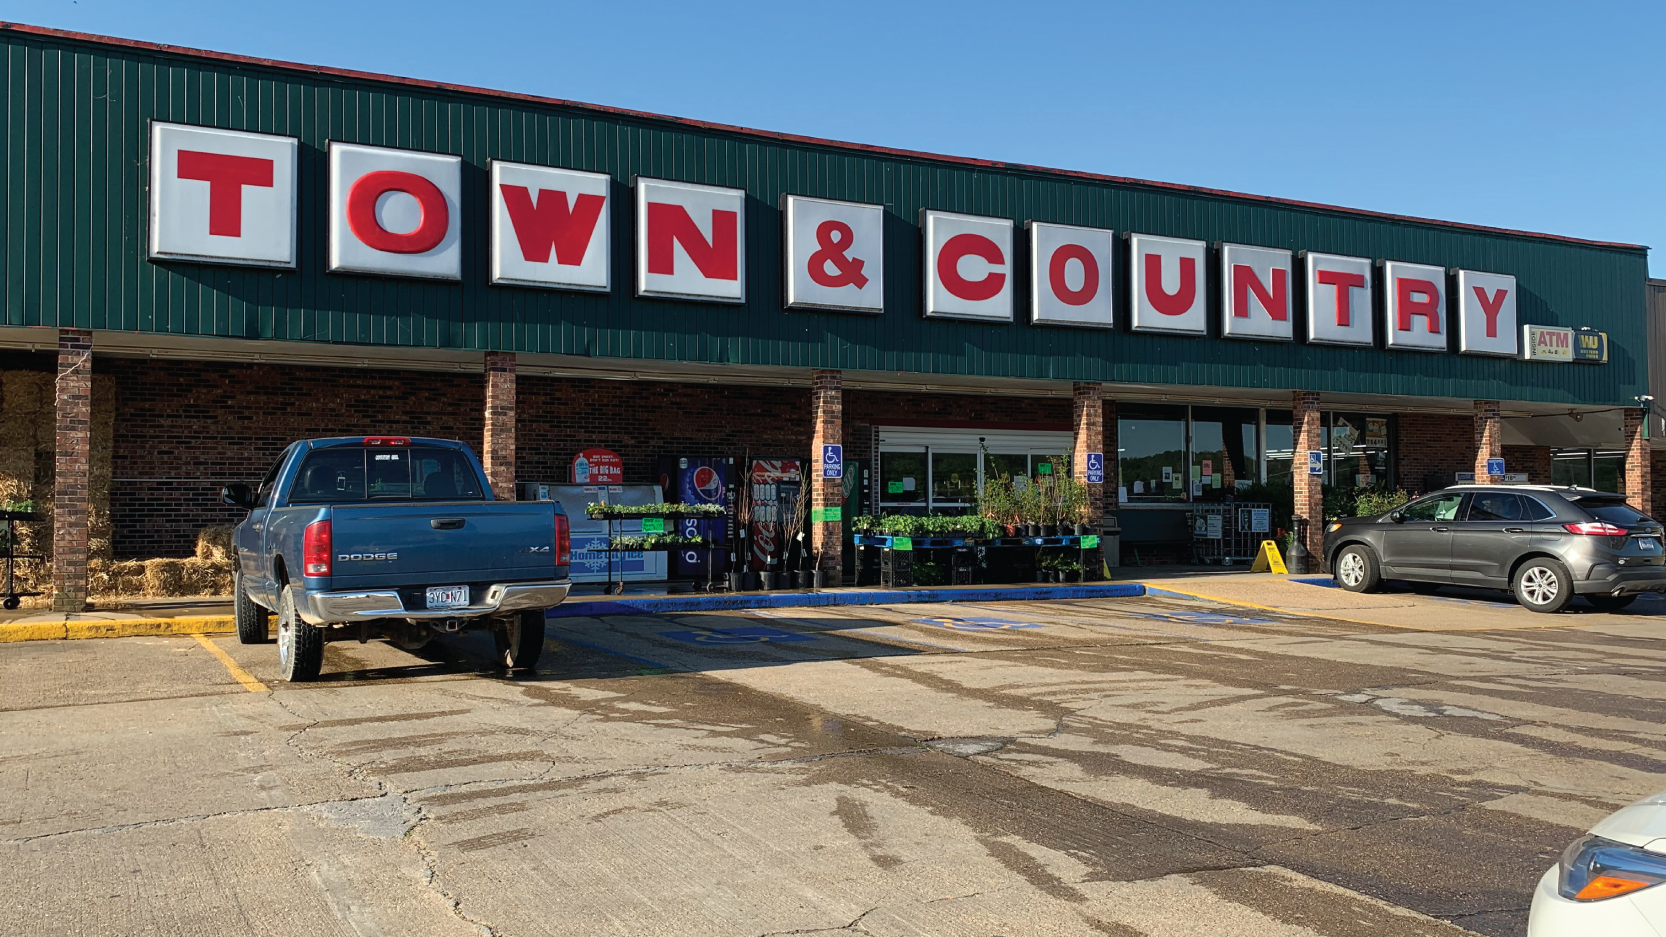 Town & Country Supermarket